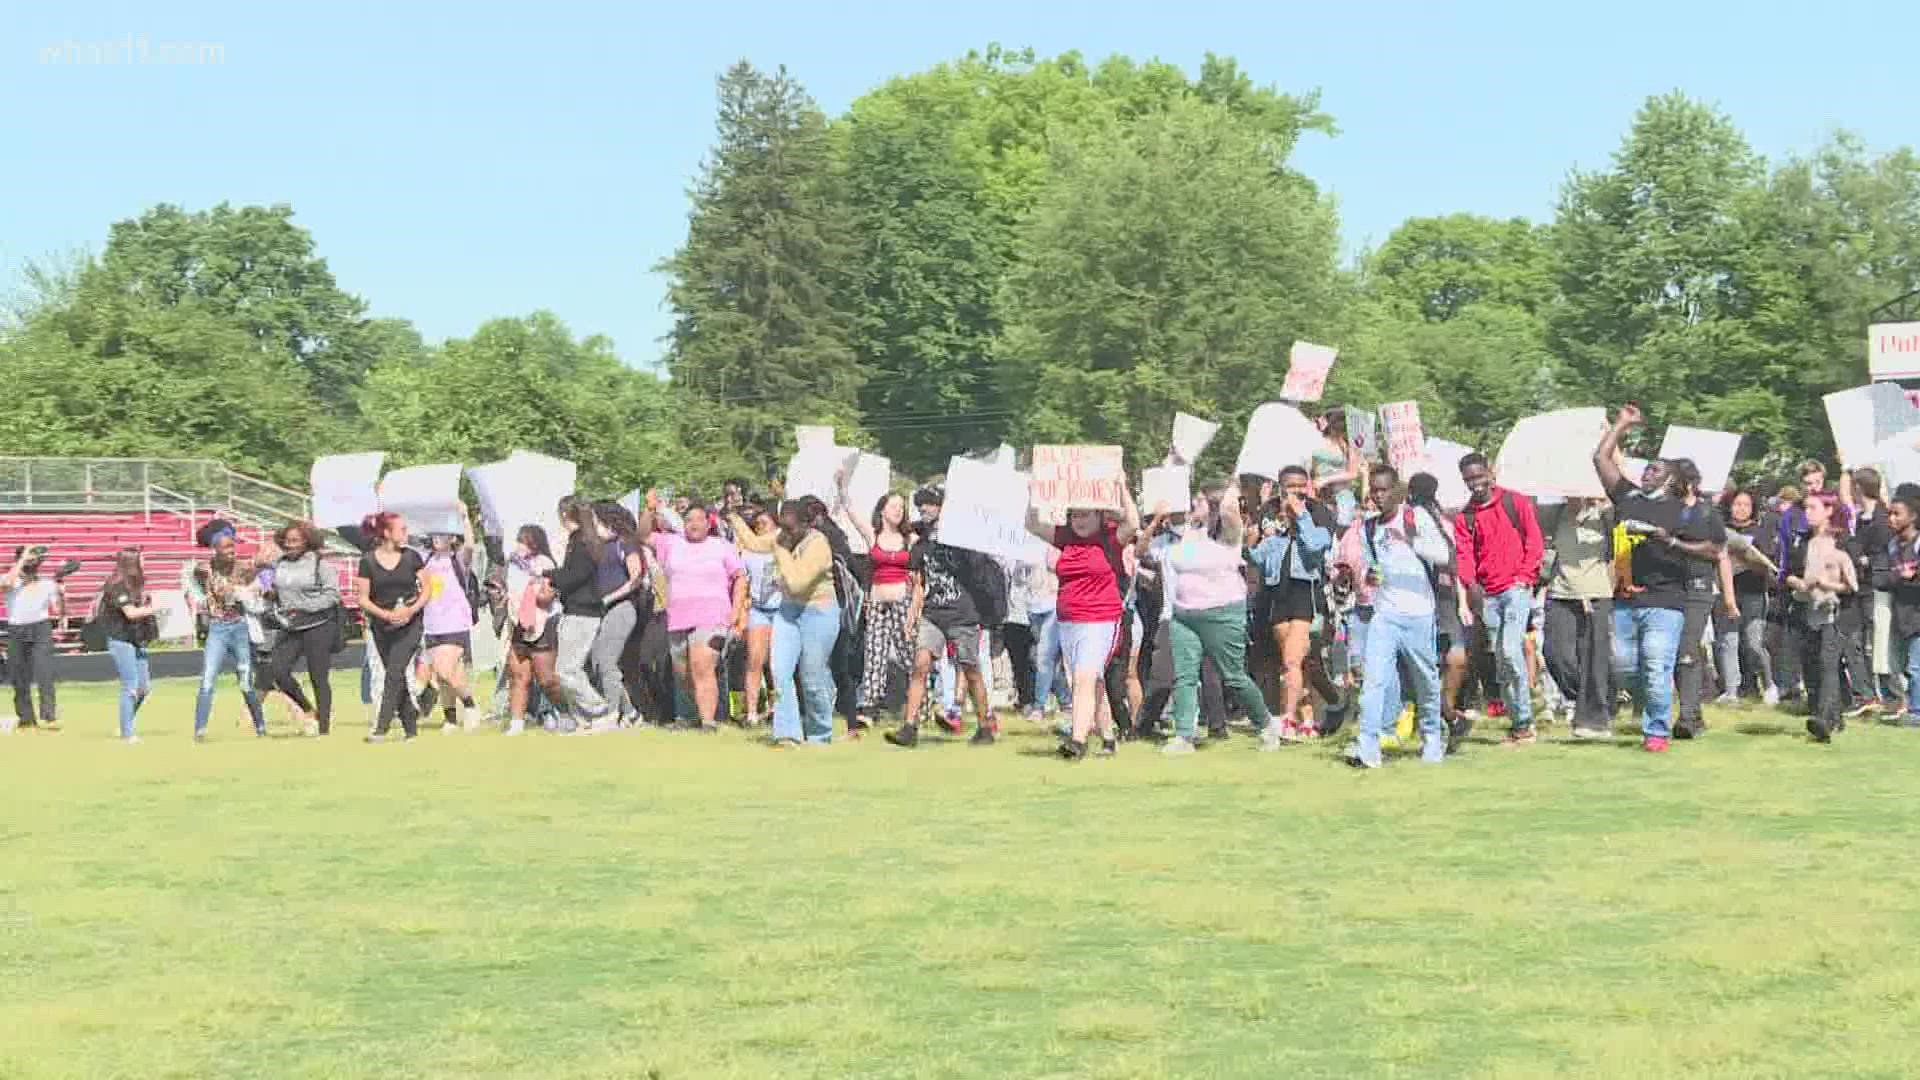 Students from Atherton and Wagner high schools stepped outside of the classroom to make their voices heard.